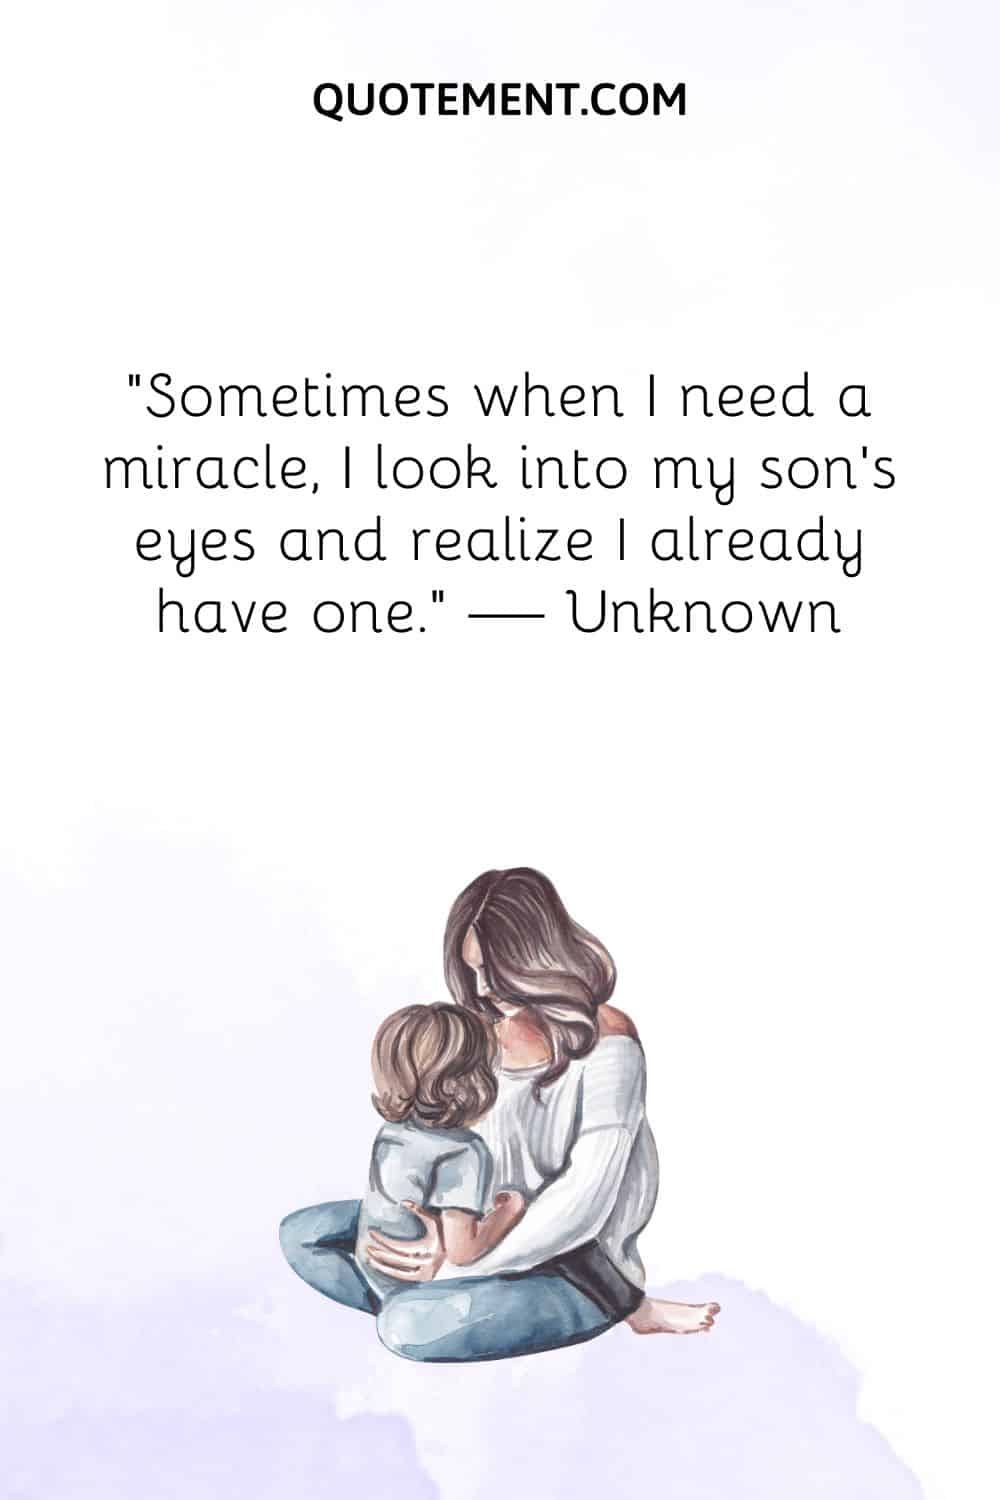 Sometimes when I need a miracle, I look into my son’s eyes and realize I already have one